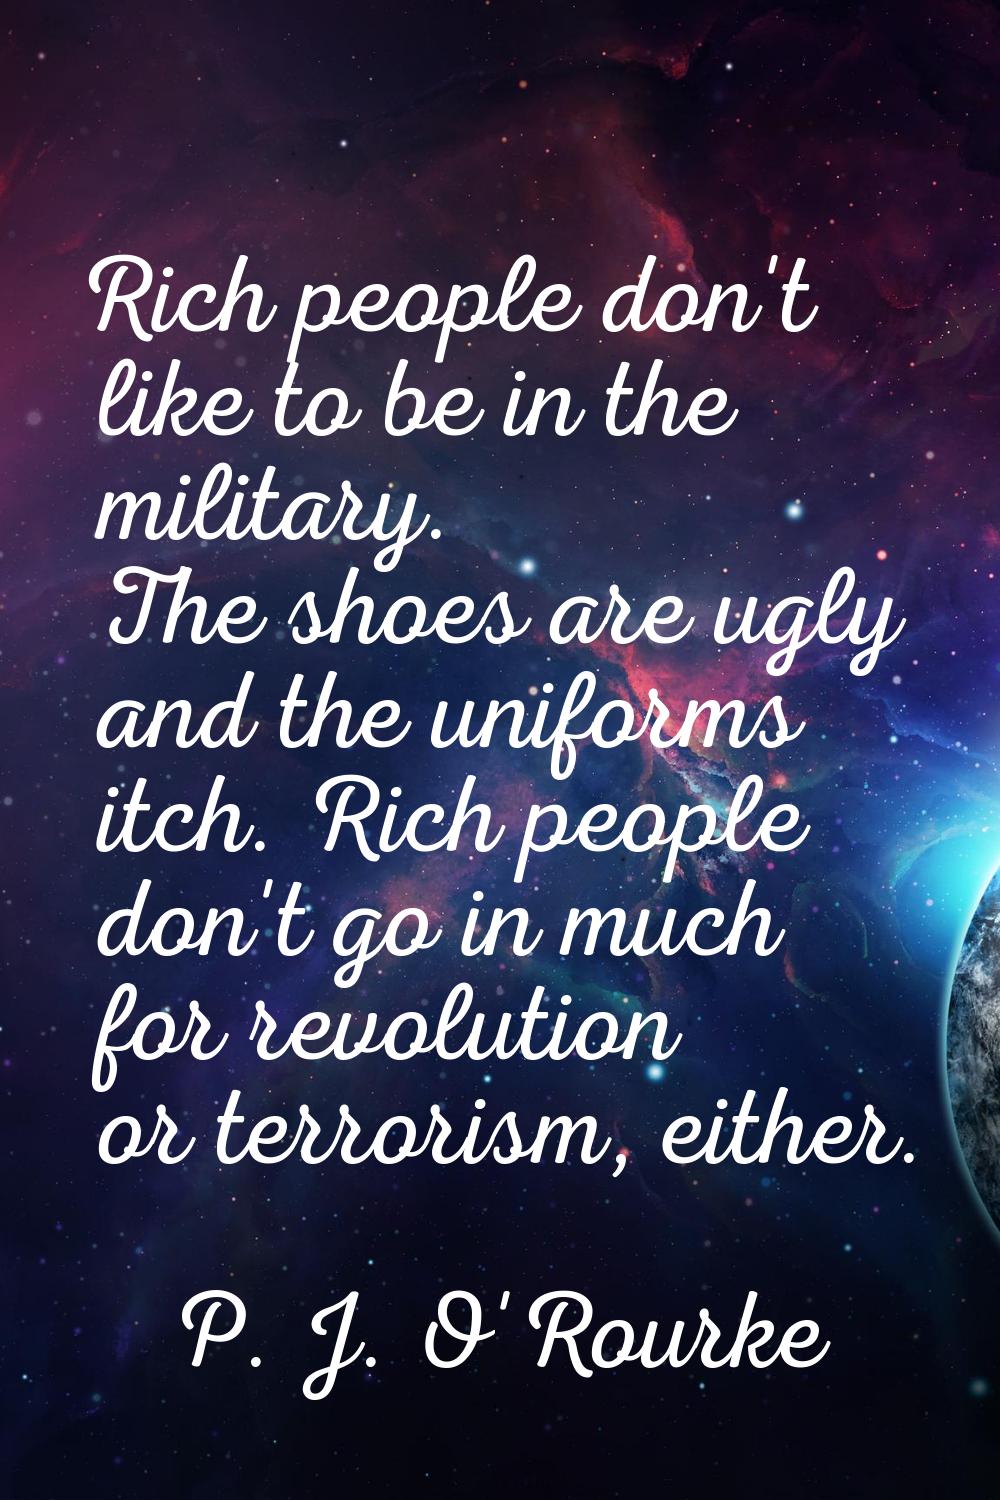 Rich people don't like to be in the military. The shoes are ugly and the uniforms itch. Rich people